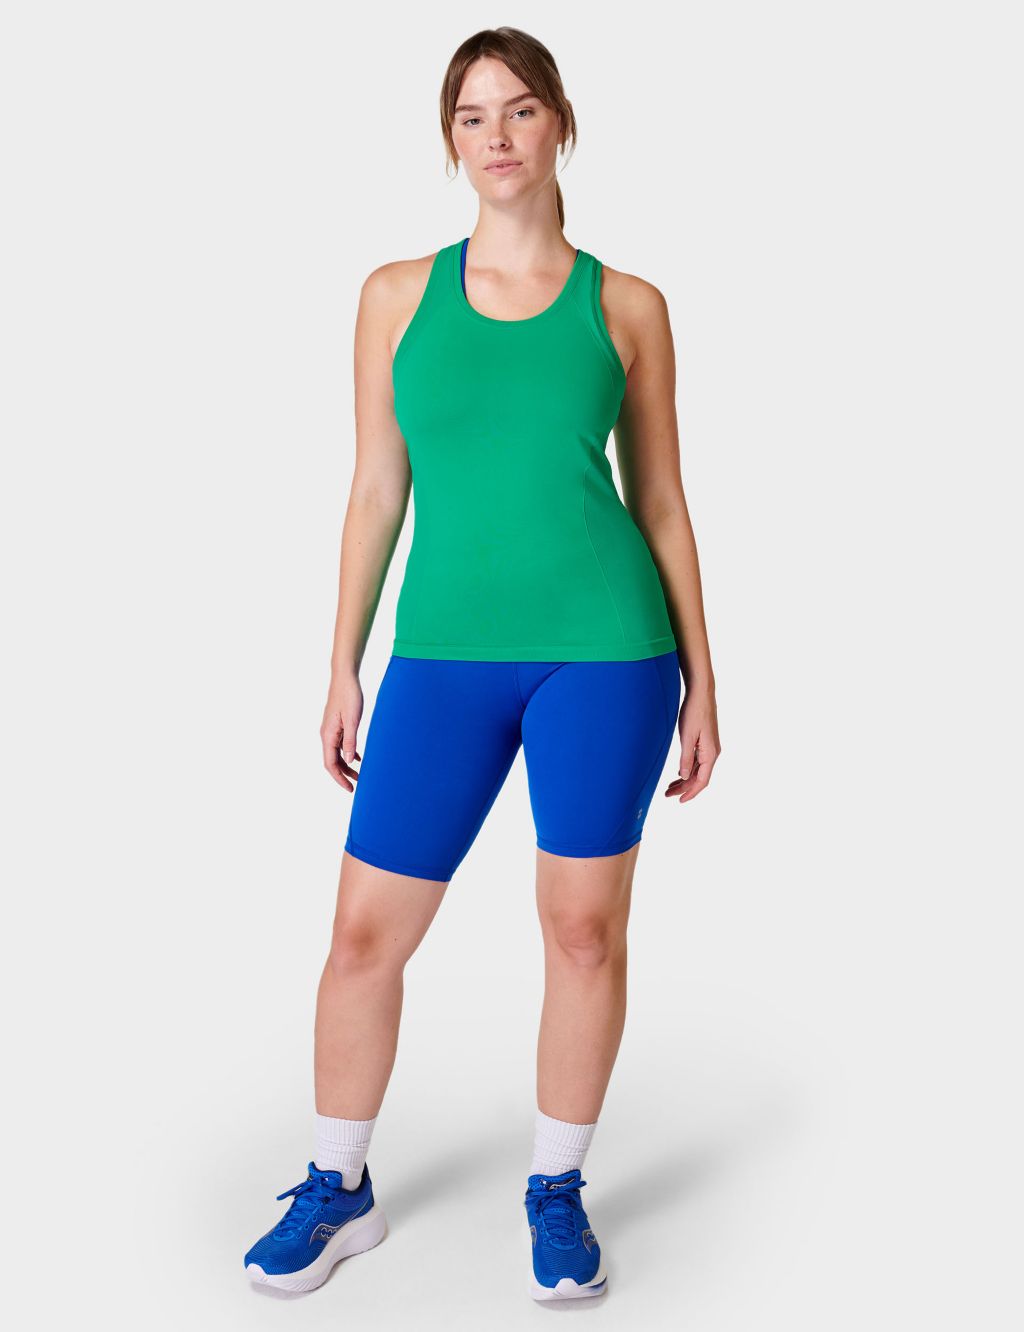 Athlete Seamless Fitted Vest Top image 2